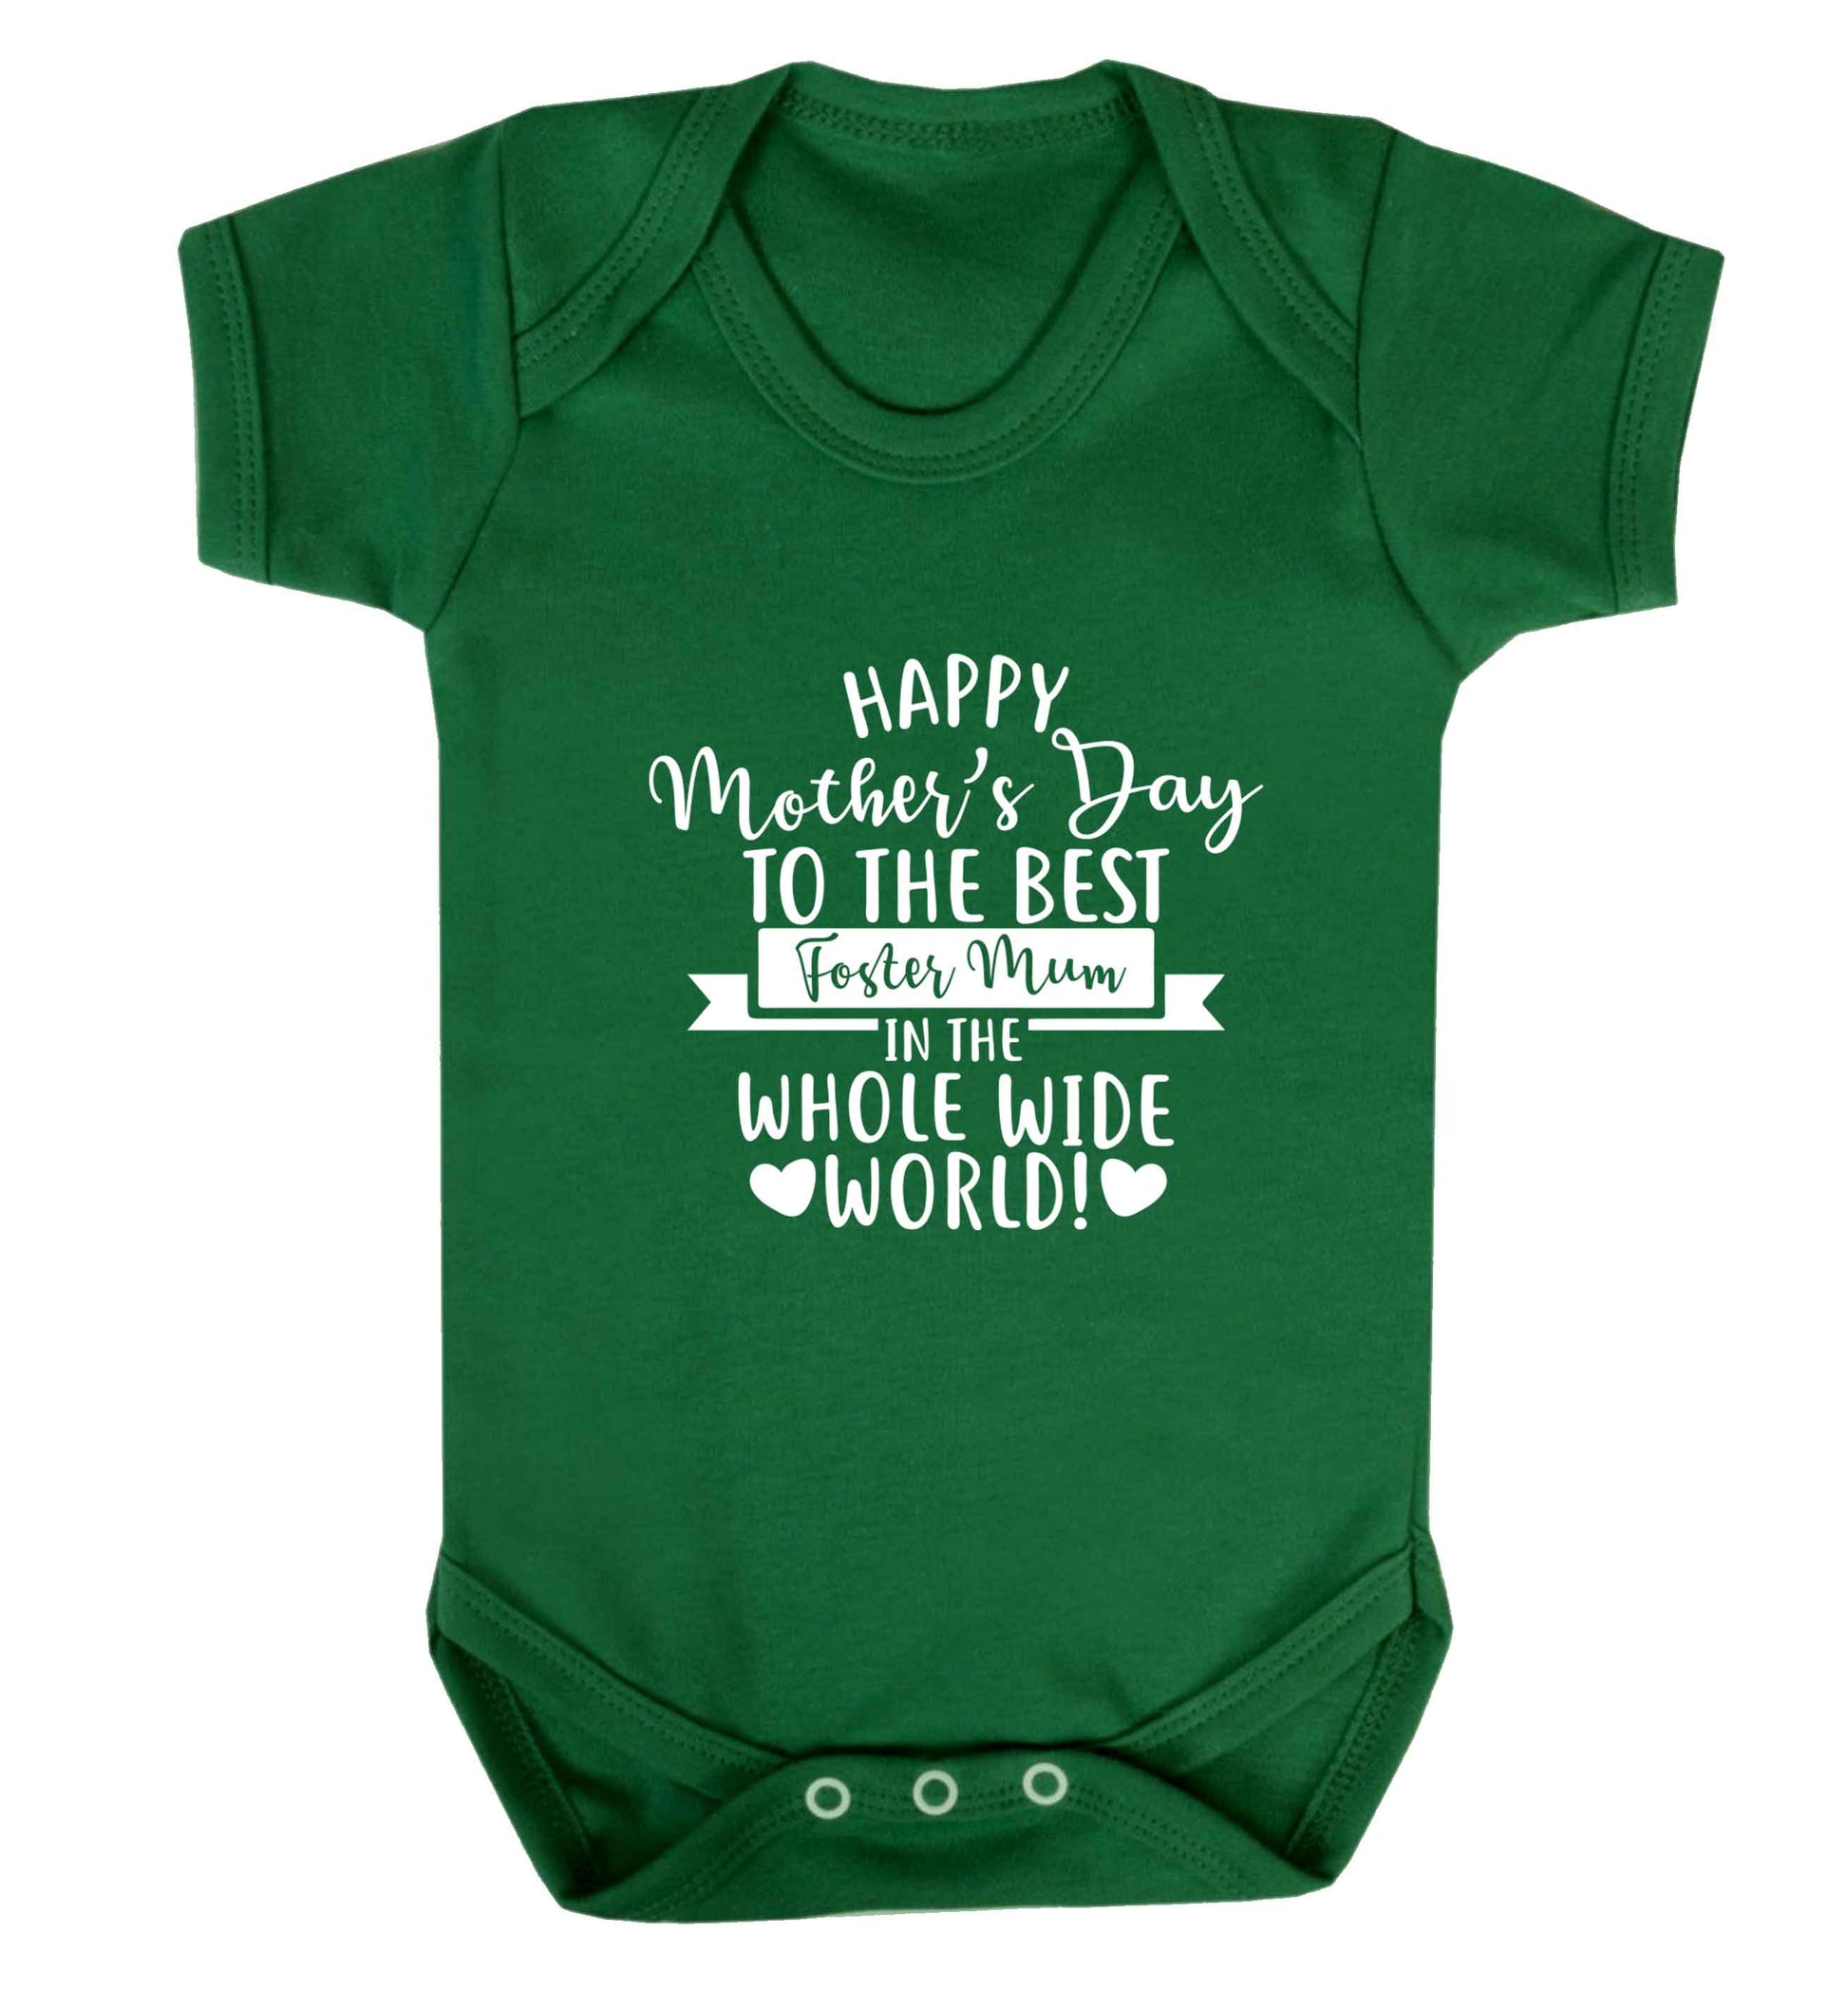 Happy mother's day to the best foster mum in the world baby vest green 18-24 months